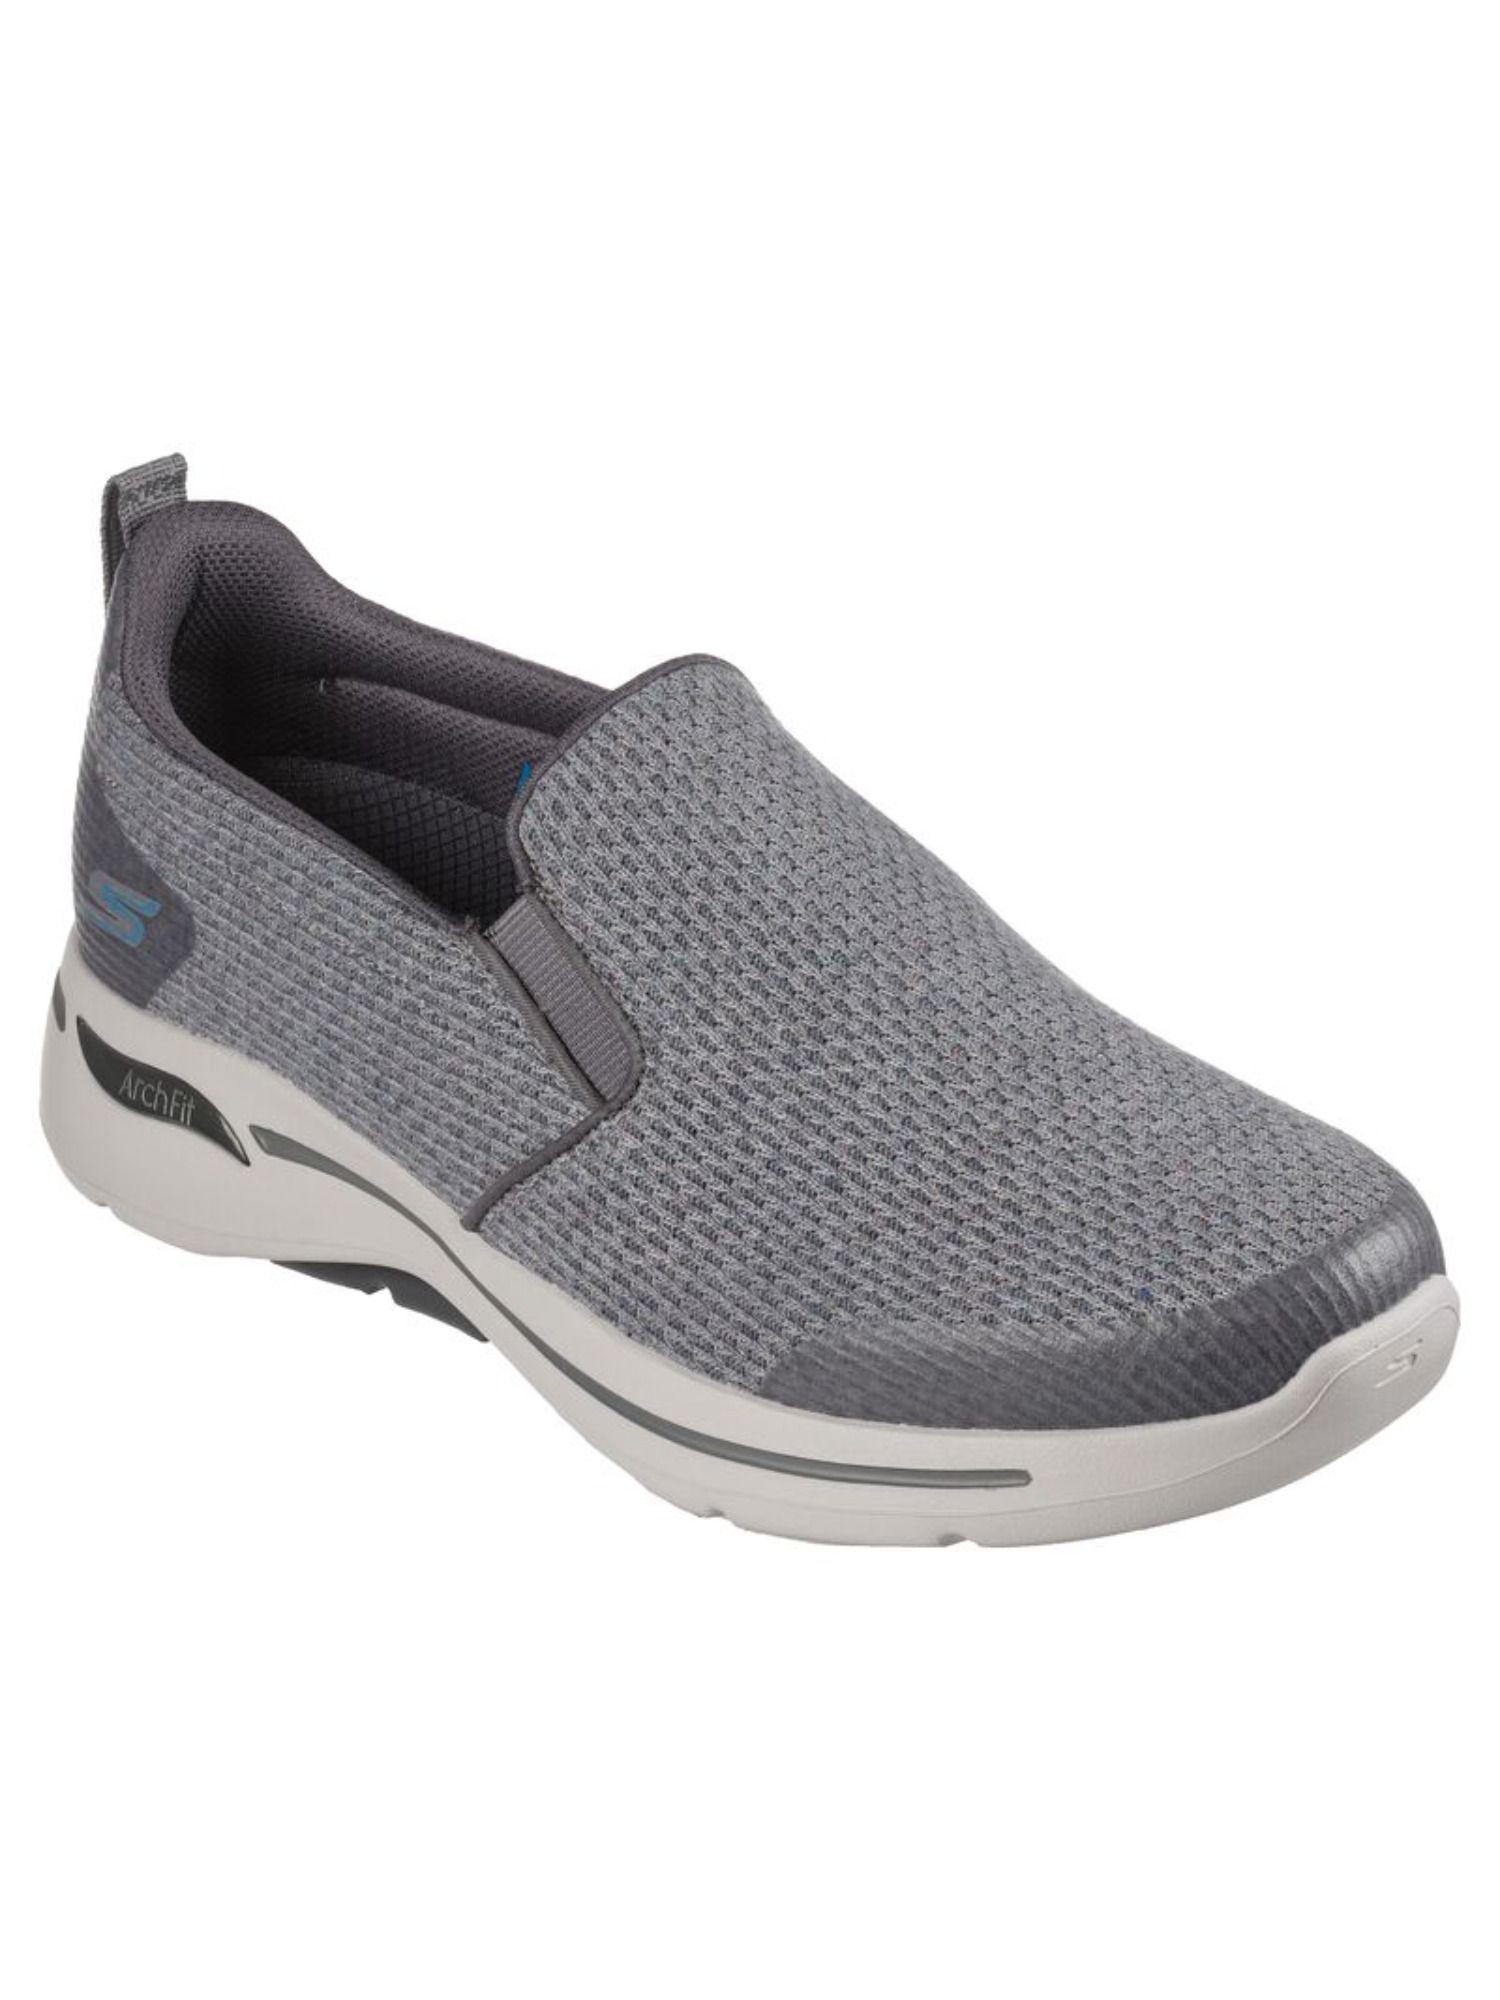 go-walk-arch-fit---our-earth-grey-arch-fit-walking-shoes